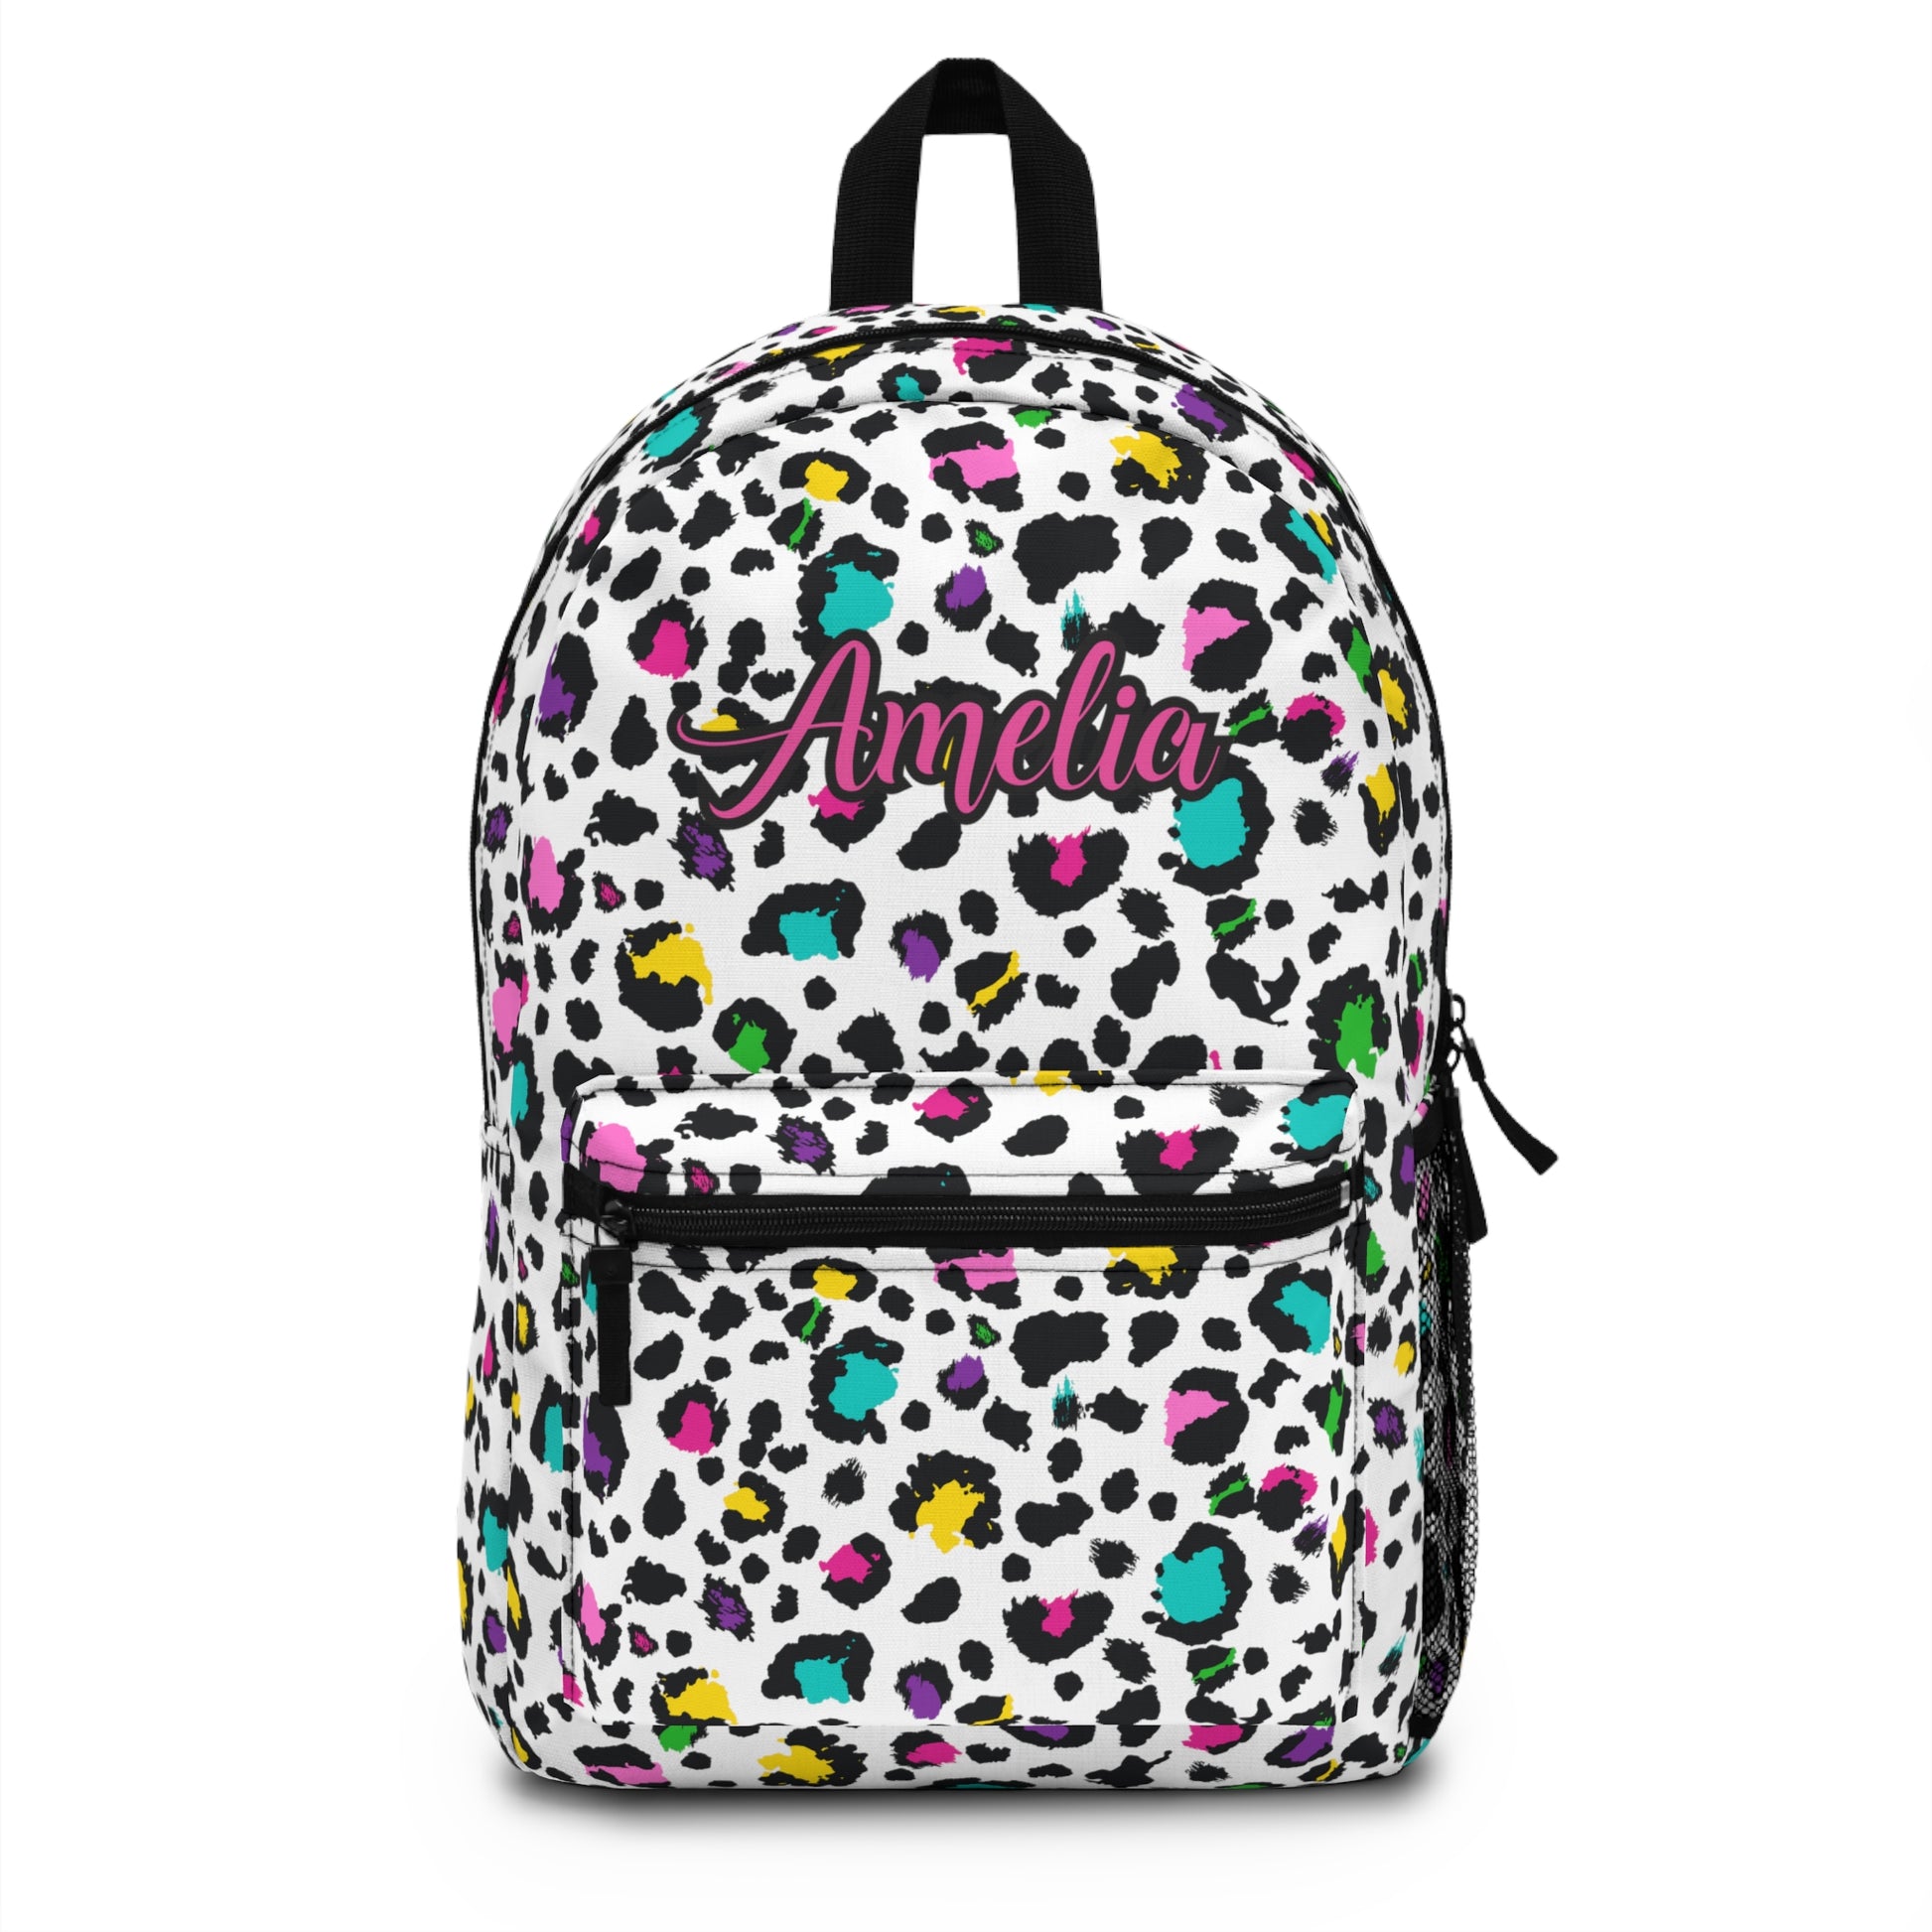 rainbow leopard print personalized backpack with girls name for back to school